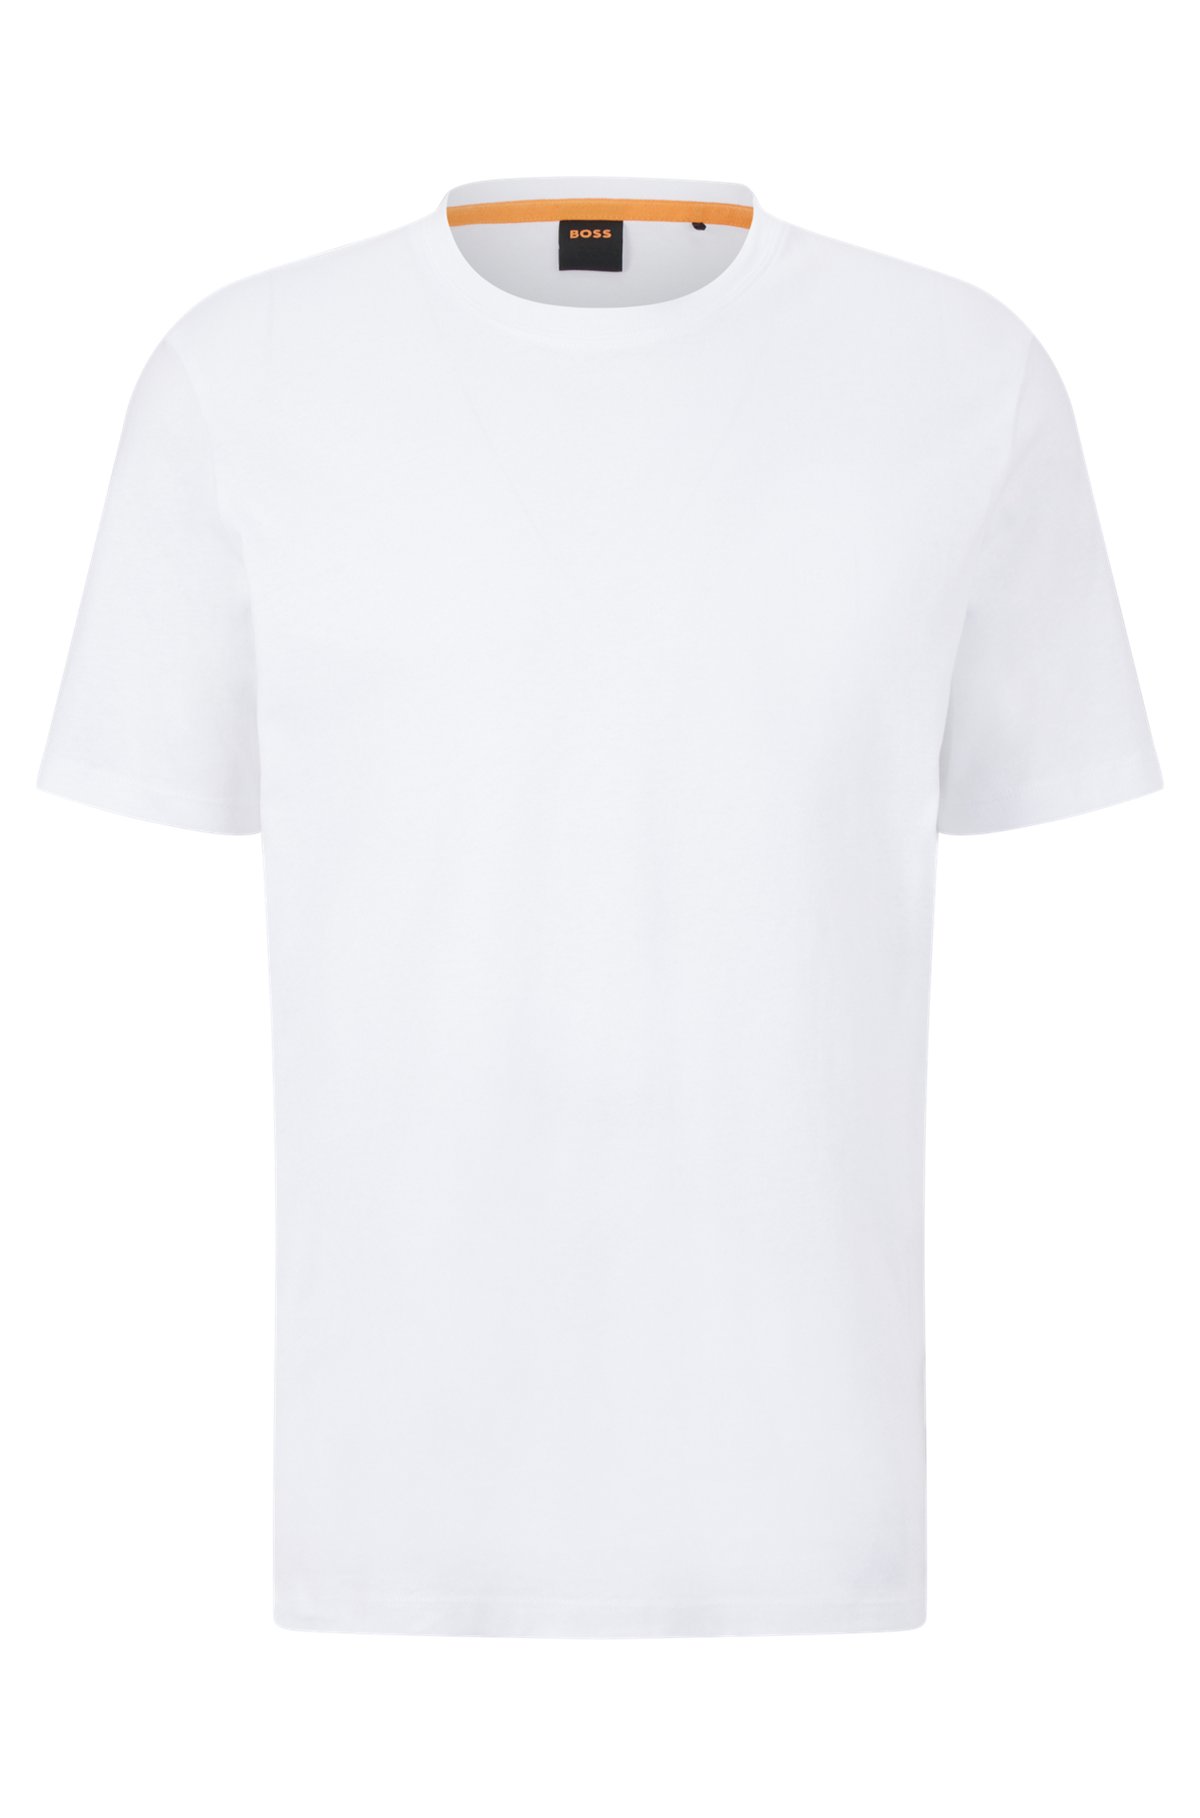 T-shirt relaxed fit in jersey di cotone con toppa con logo, Bianco